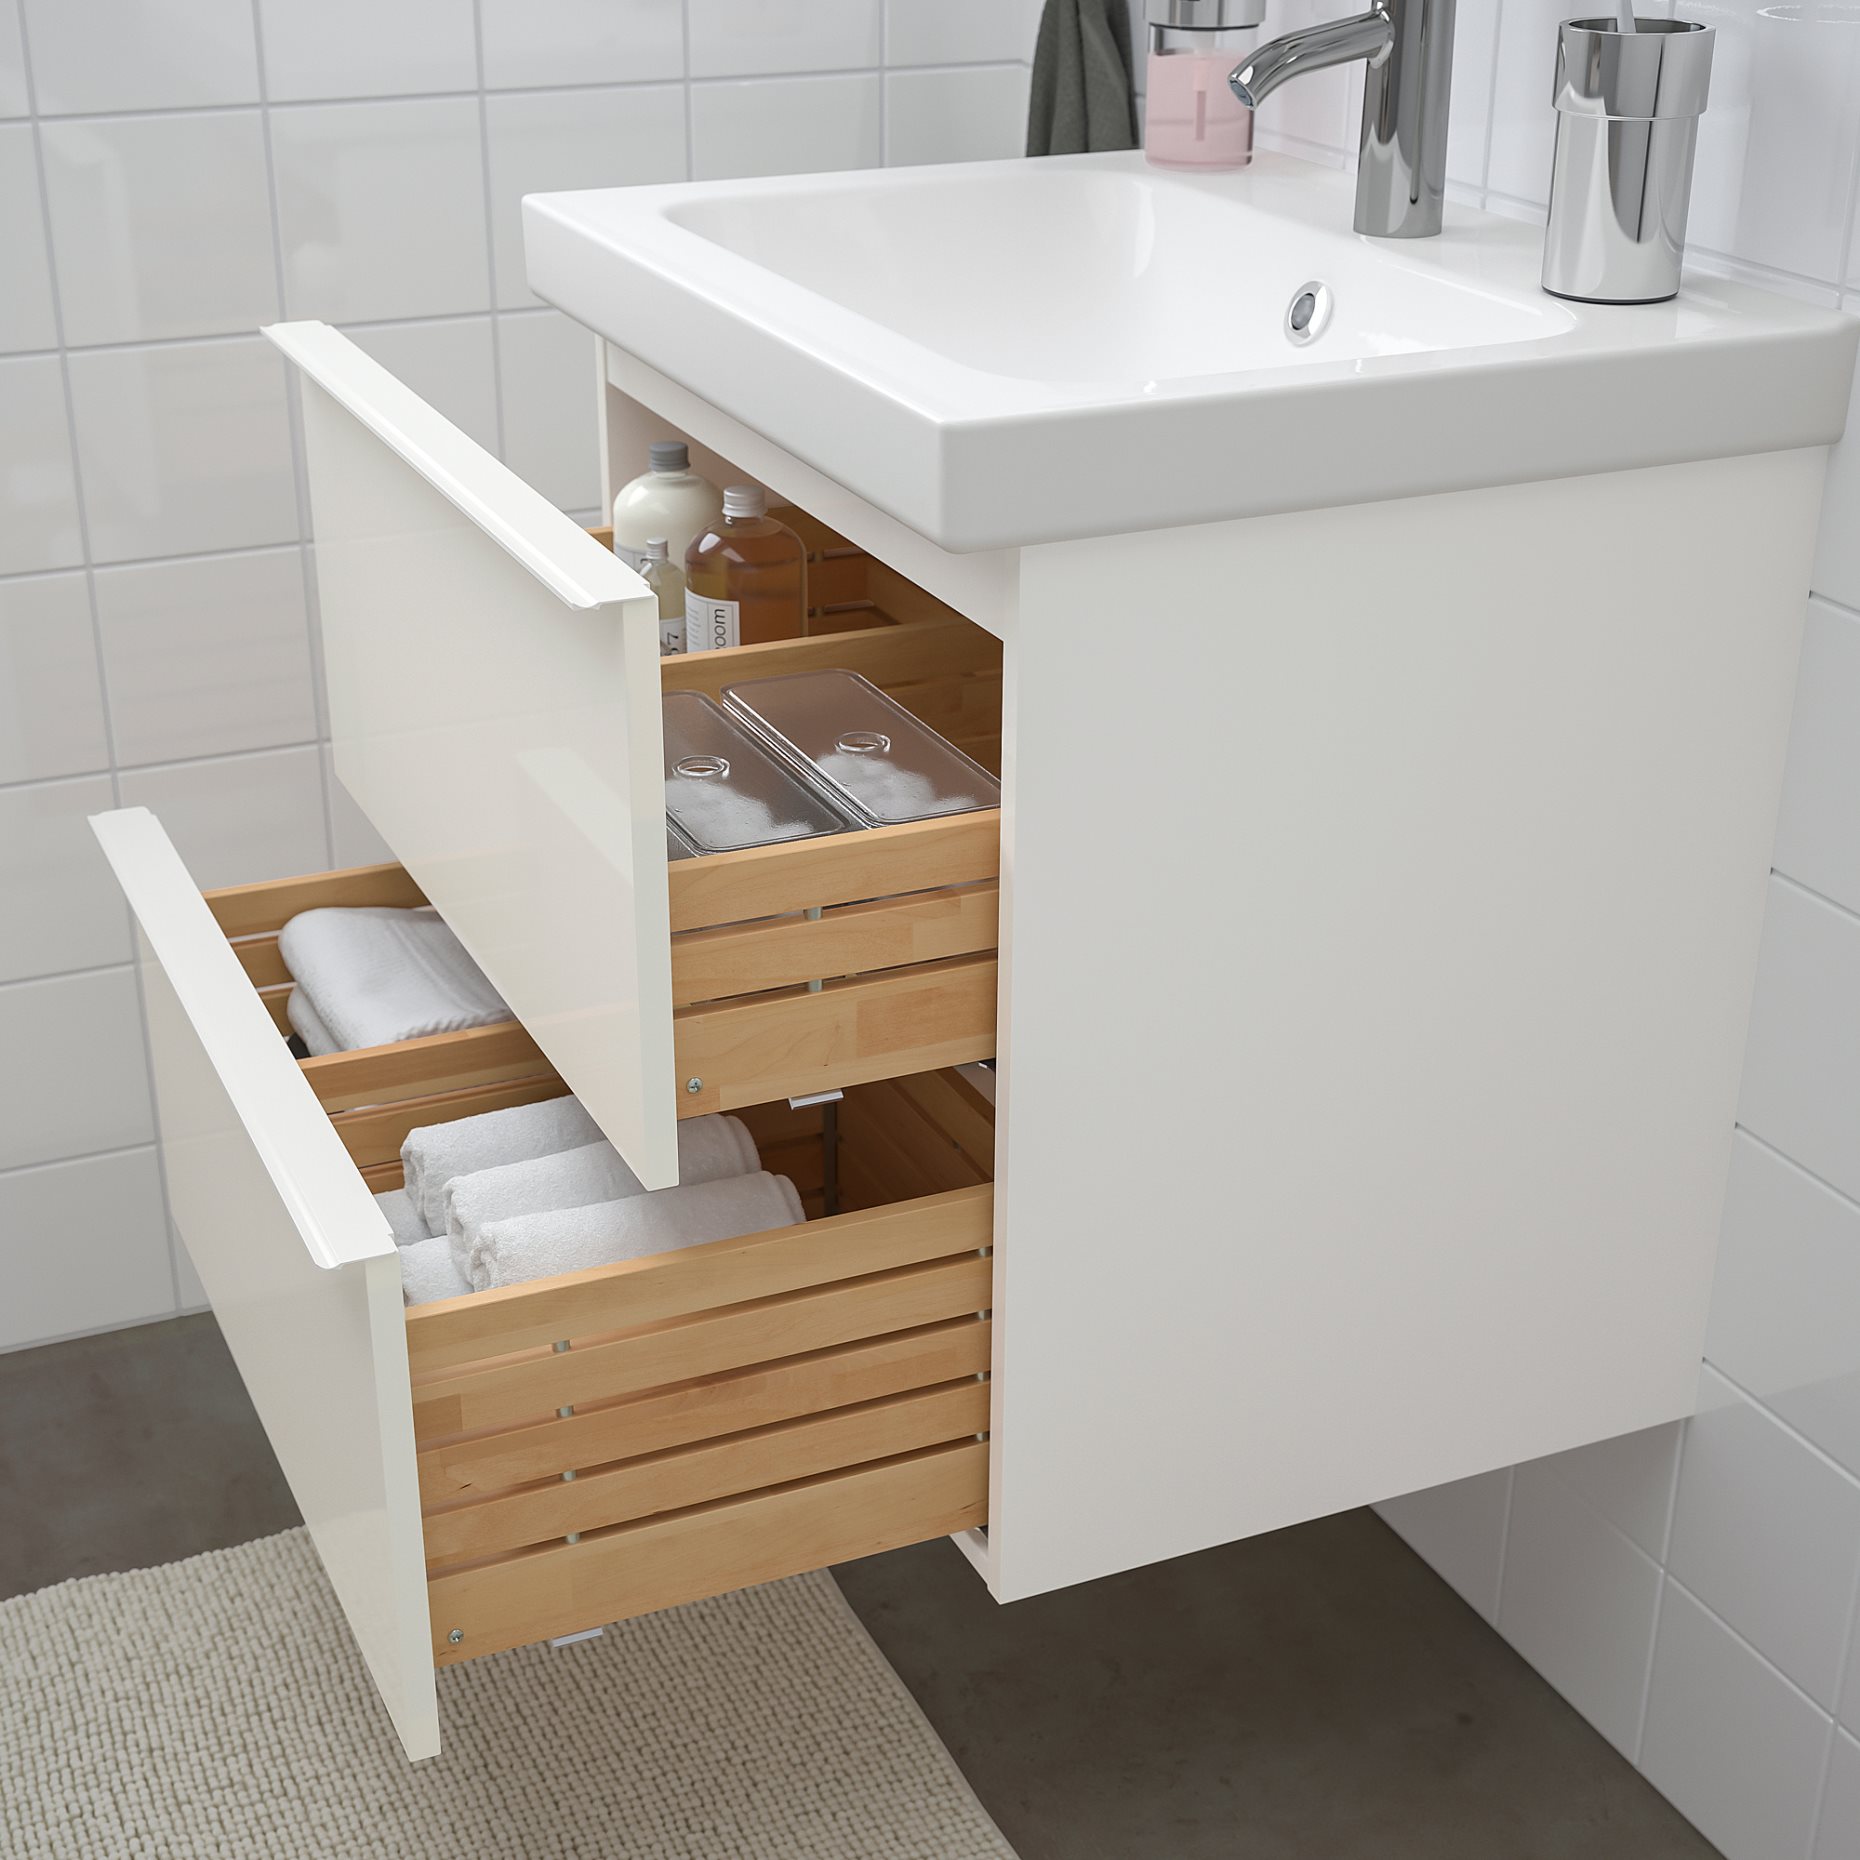 GODMORGON, wash-stand with 2 drawers/high-gloss, 60x47x58 cm, 801.955.36